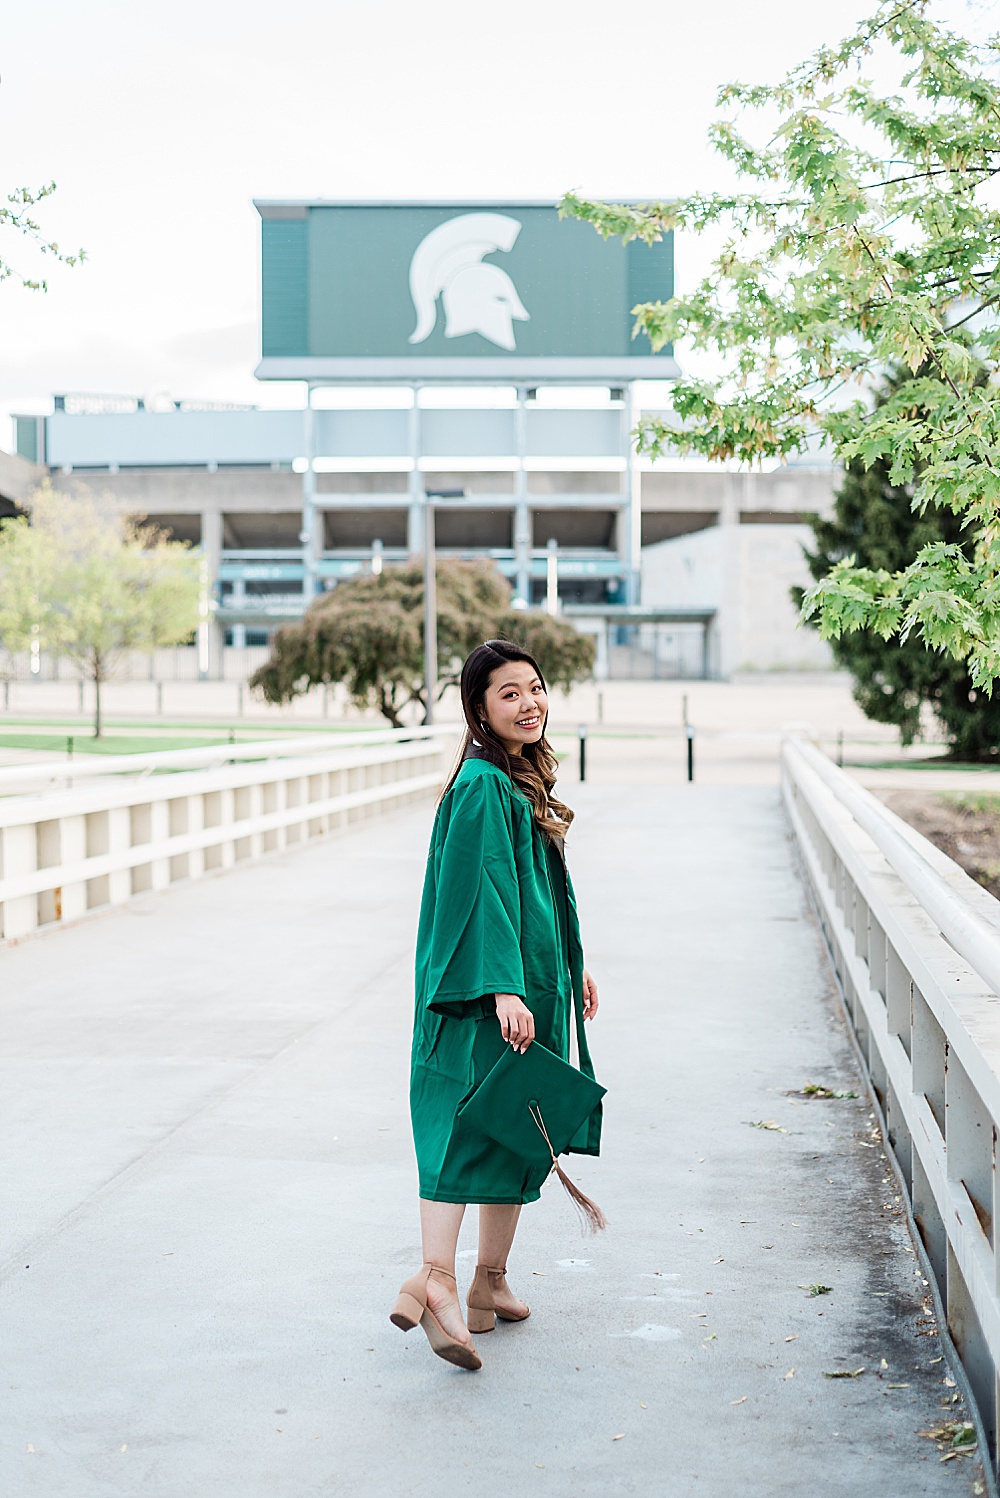 Michigan State Senior grad photoshoot on MSU's campus, photo of a woman in a white dress wearing graduation gown on the bridge by Spartan Stadium, by Allie Siarto & Co., East Lansing photographers